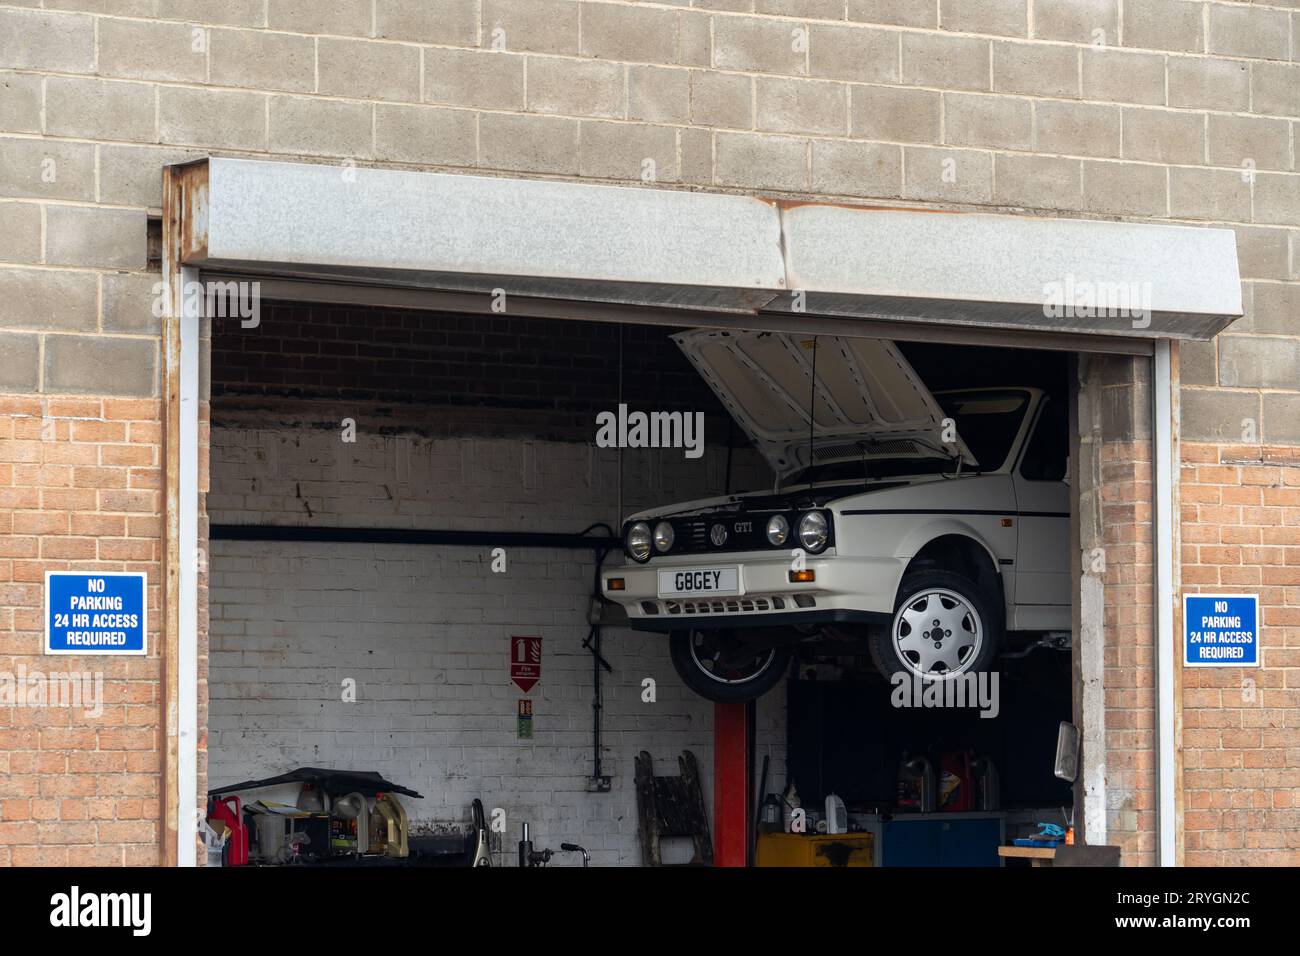 Garage mechanic shop on North Road industrial area in the town of Middlesbrough, UK Stock Photo